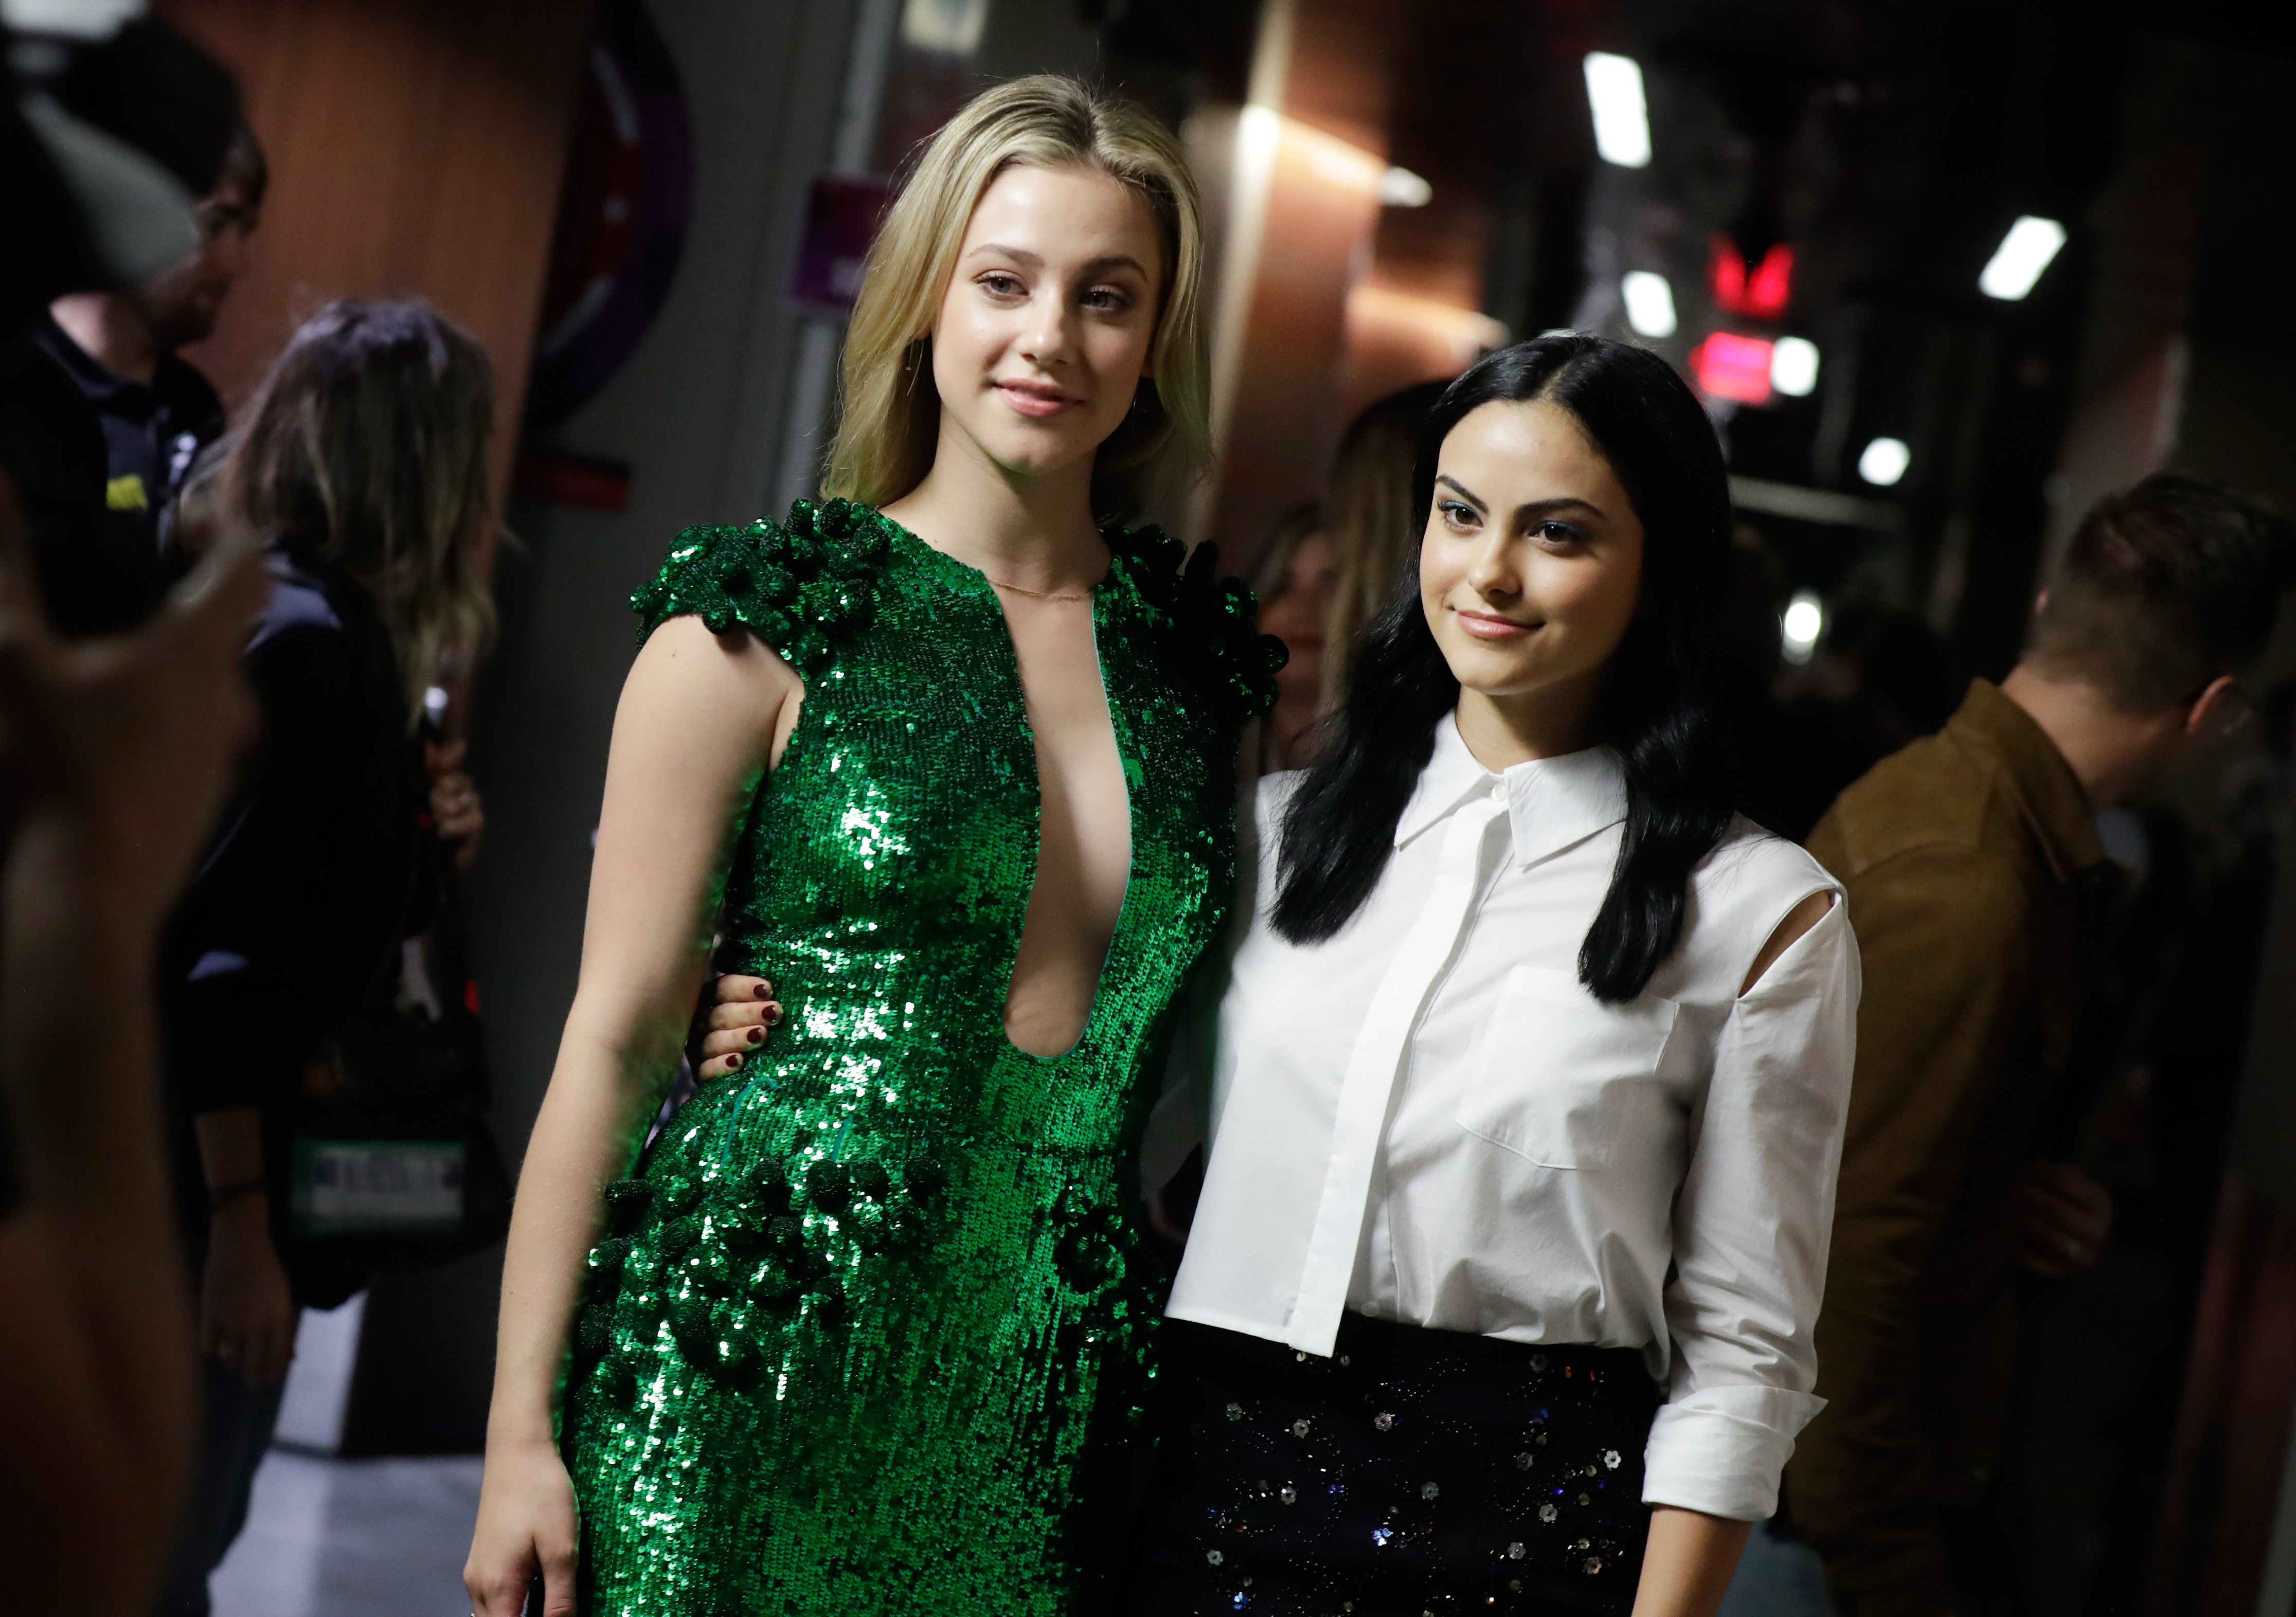 Lili Reinhart vs. Camila Mendes: Which ‘Riverdale’ Star is Worth More?